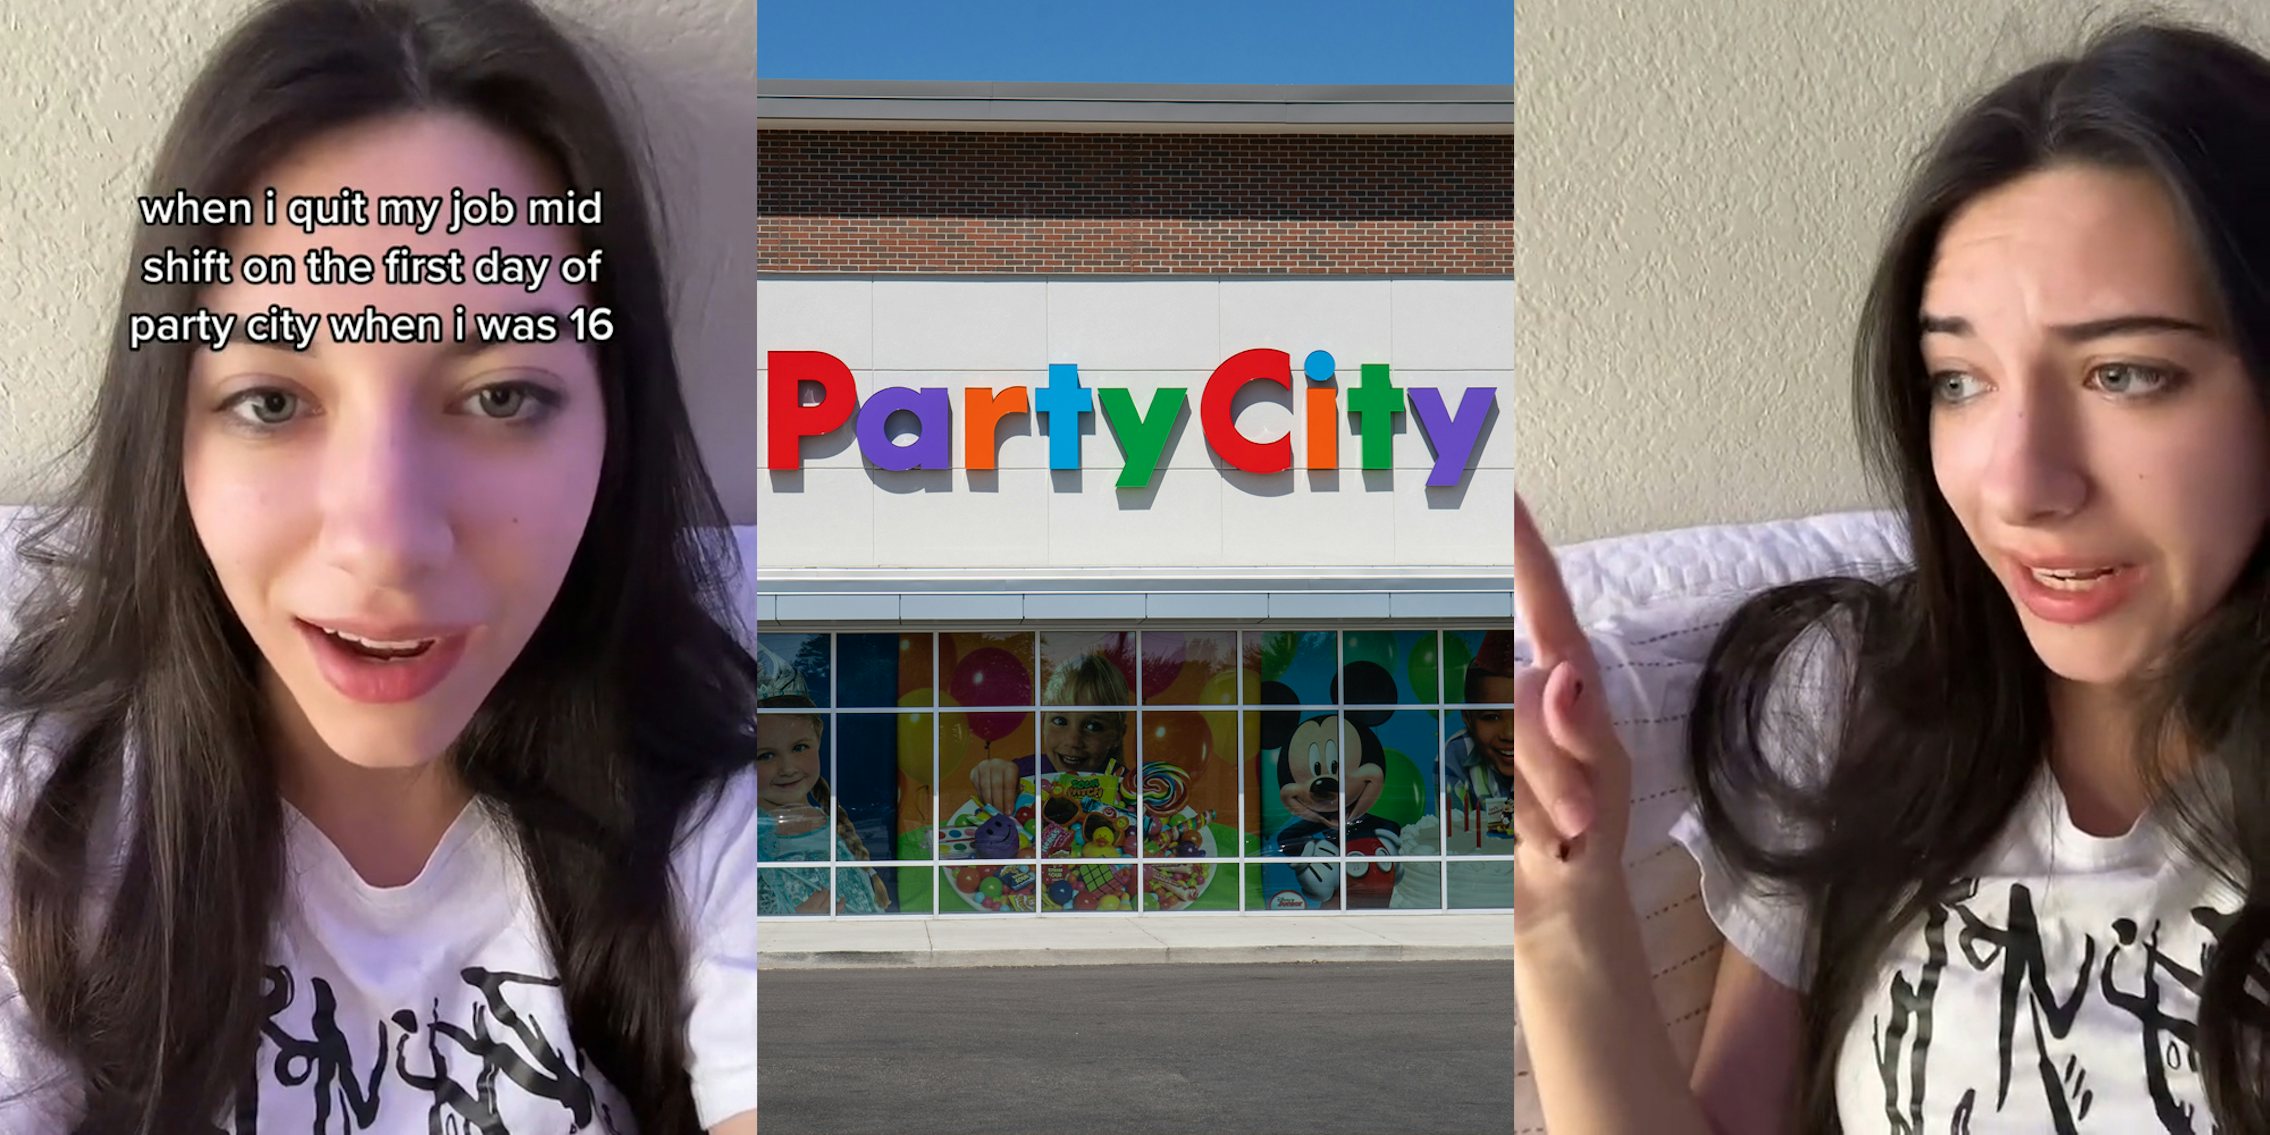 ex Party City employee speaking caption 'when i quit my job mid shift on the first say of party city when i was 16' (l) Party City building with sign (c) ex Party City employee speaking with finger up (r)